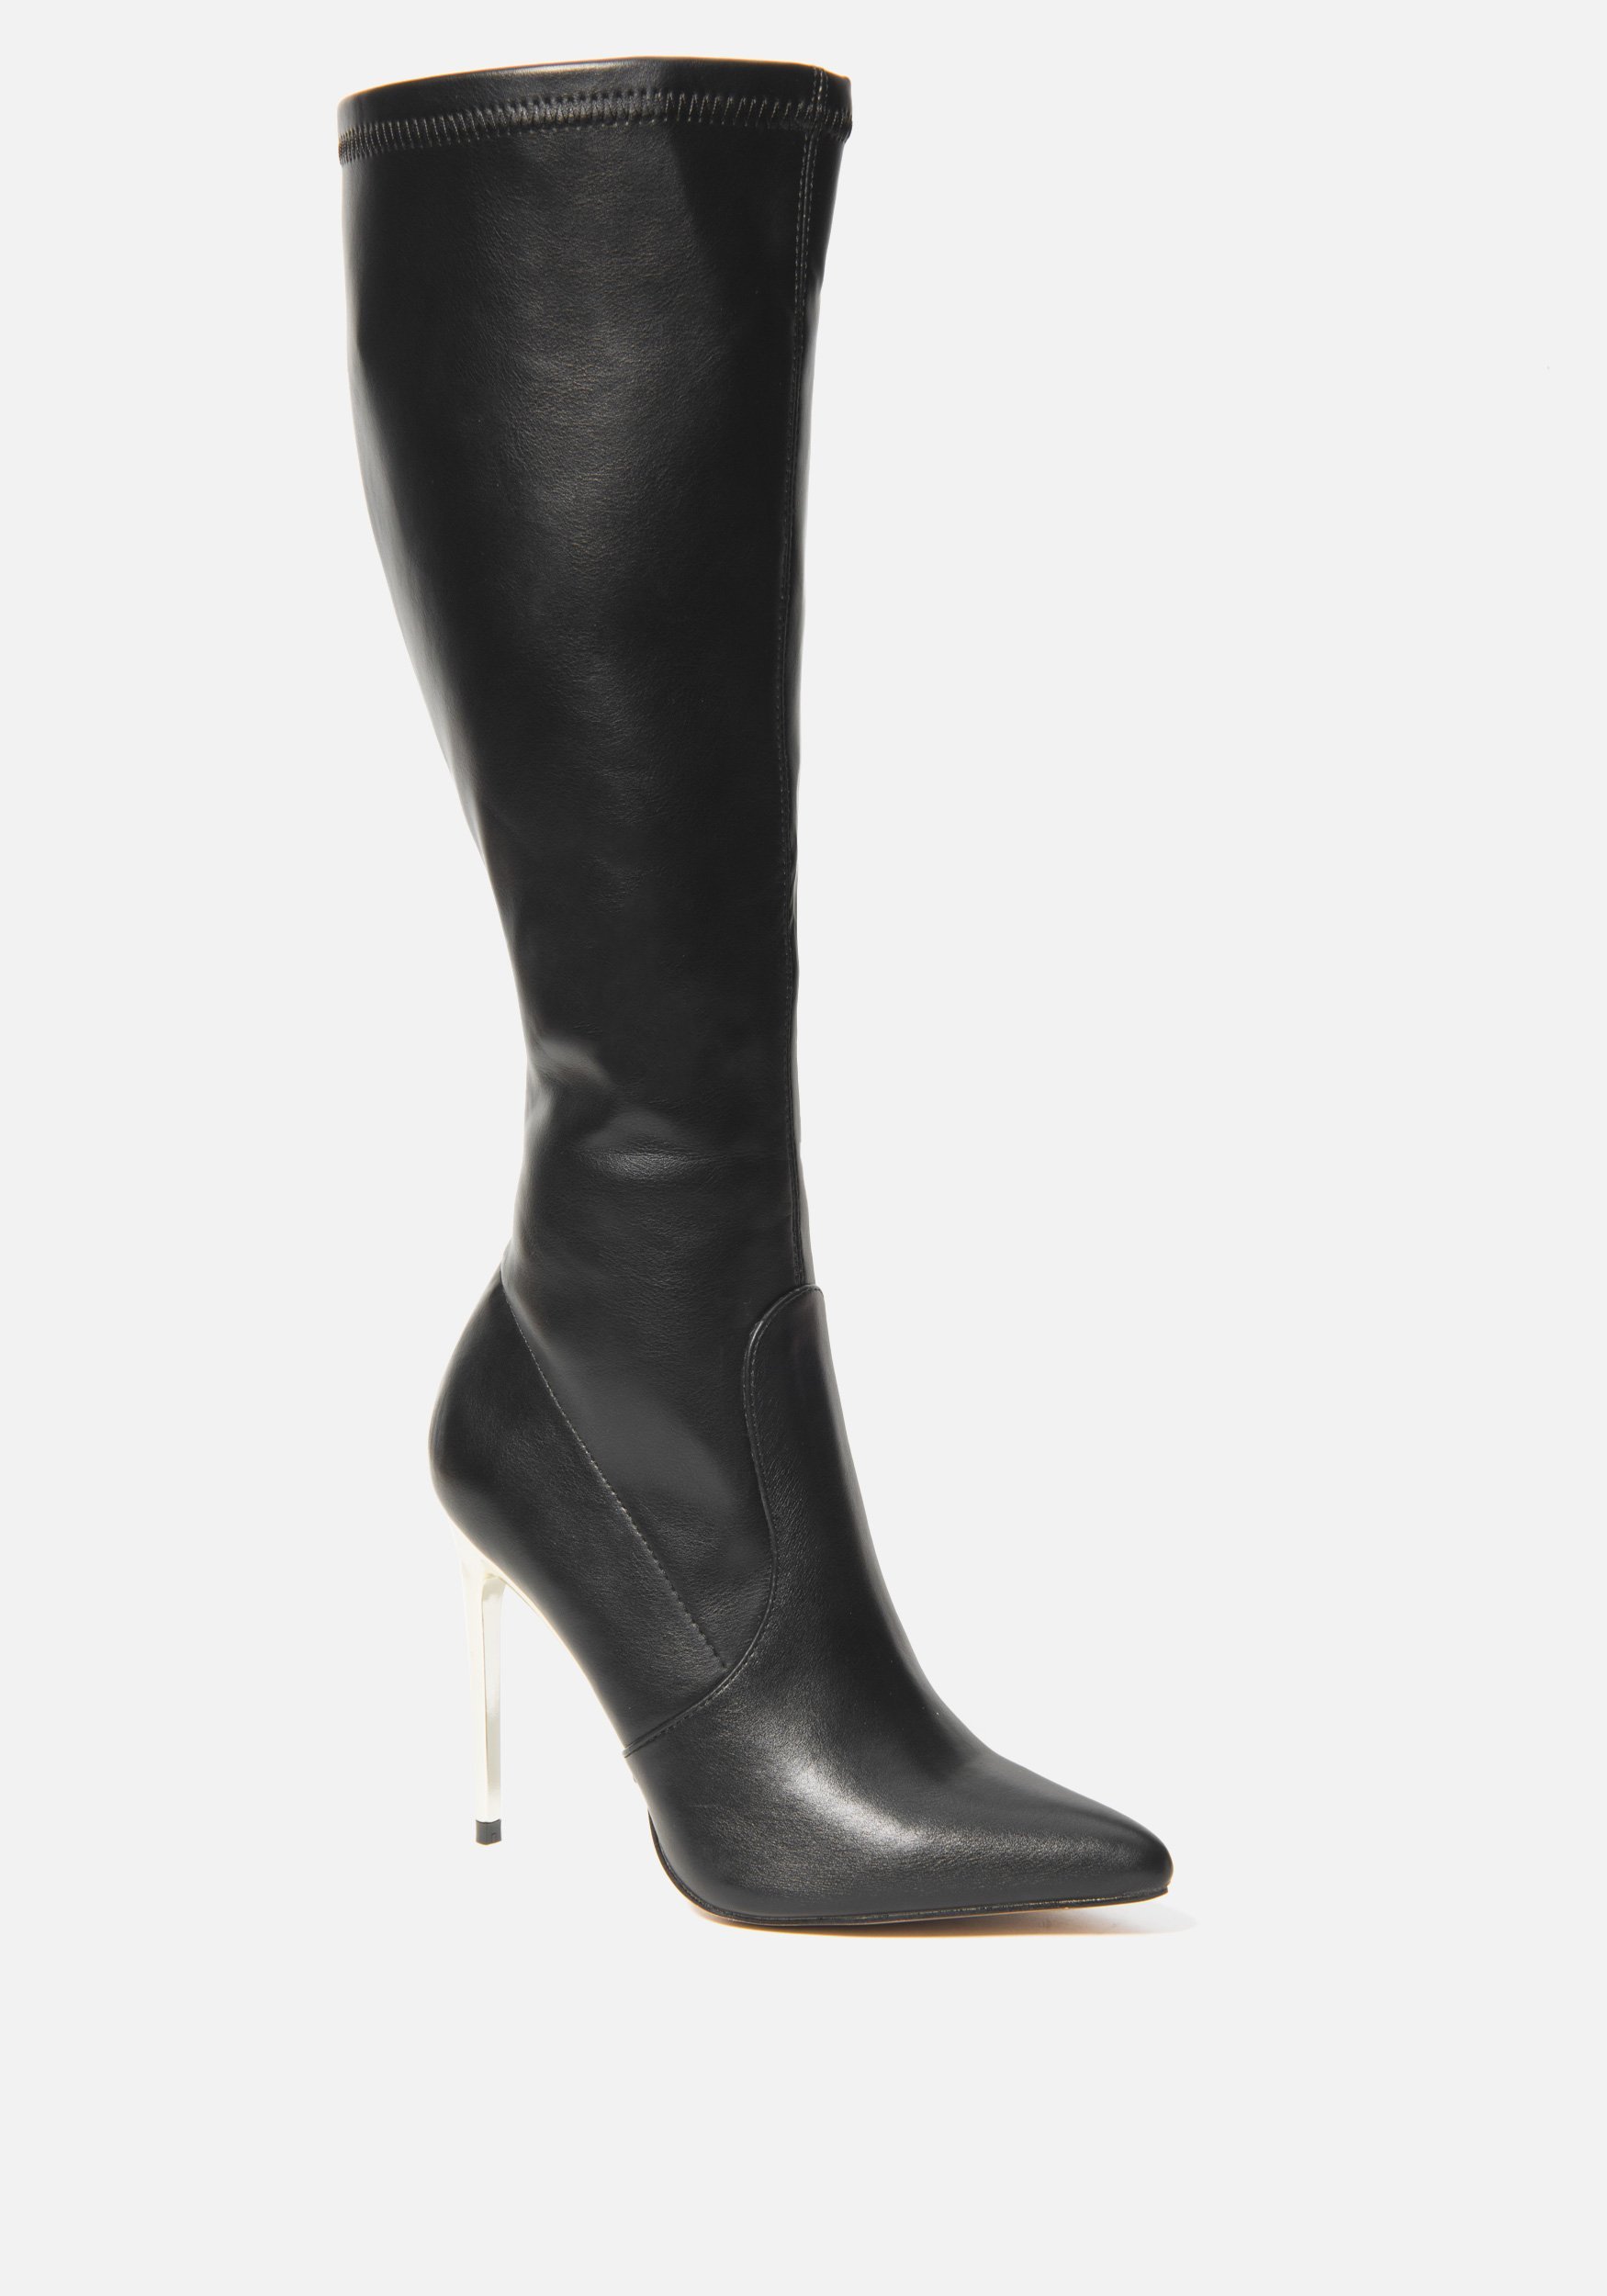 Bebe Women's Valeria Knee High Boots, Size 8 in BLACK Synthetic